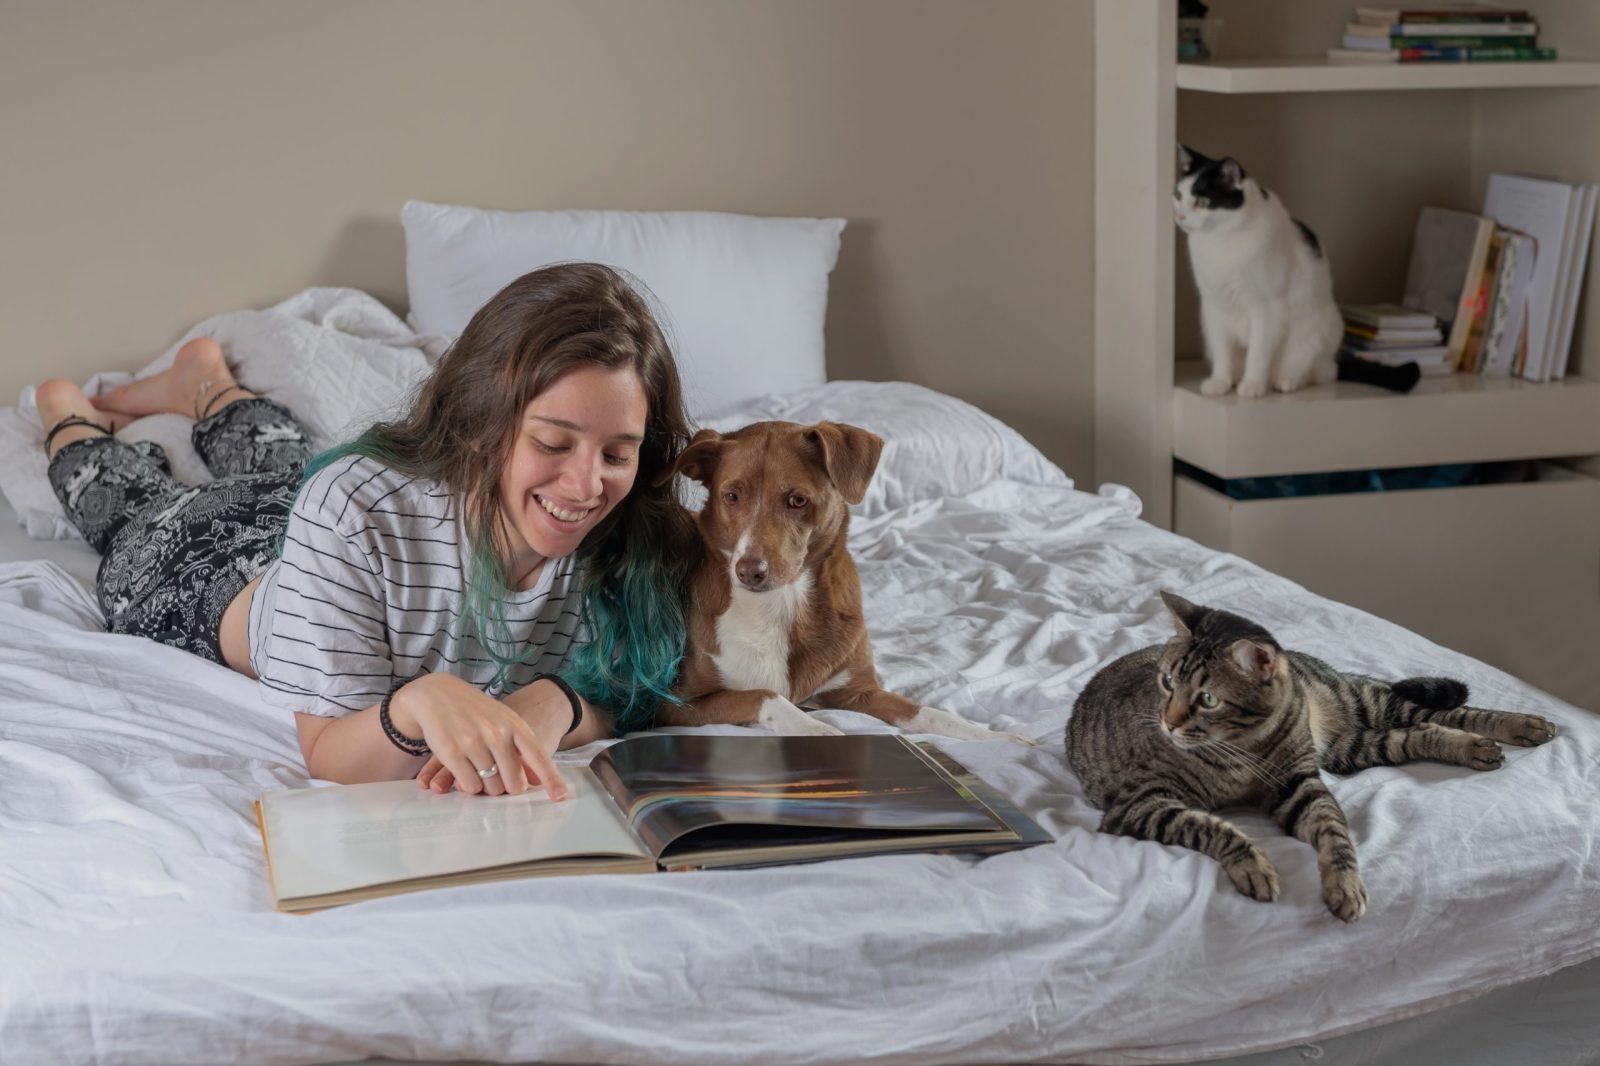 Woman reading book on bed next to a dog and cat